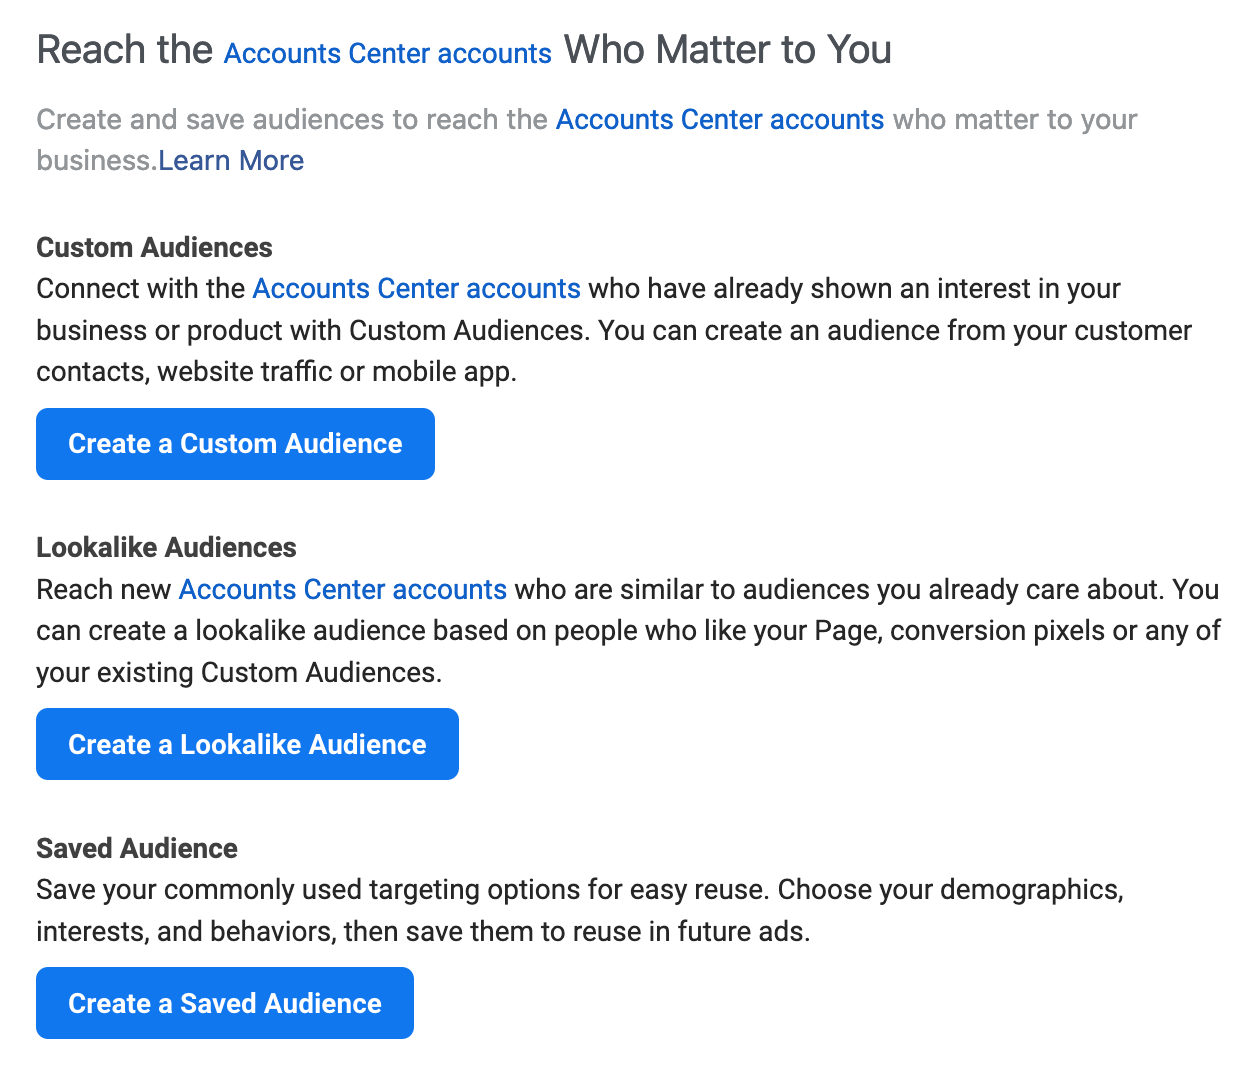 Screenshot of reaching the accounts center accounts who matter to you (Facebook Audiences)